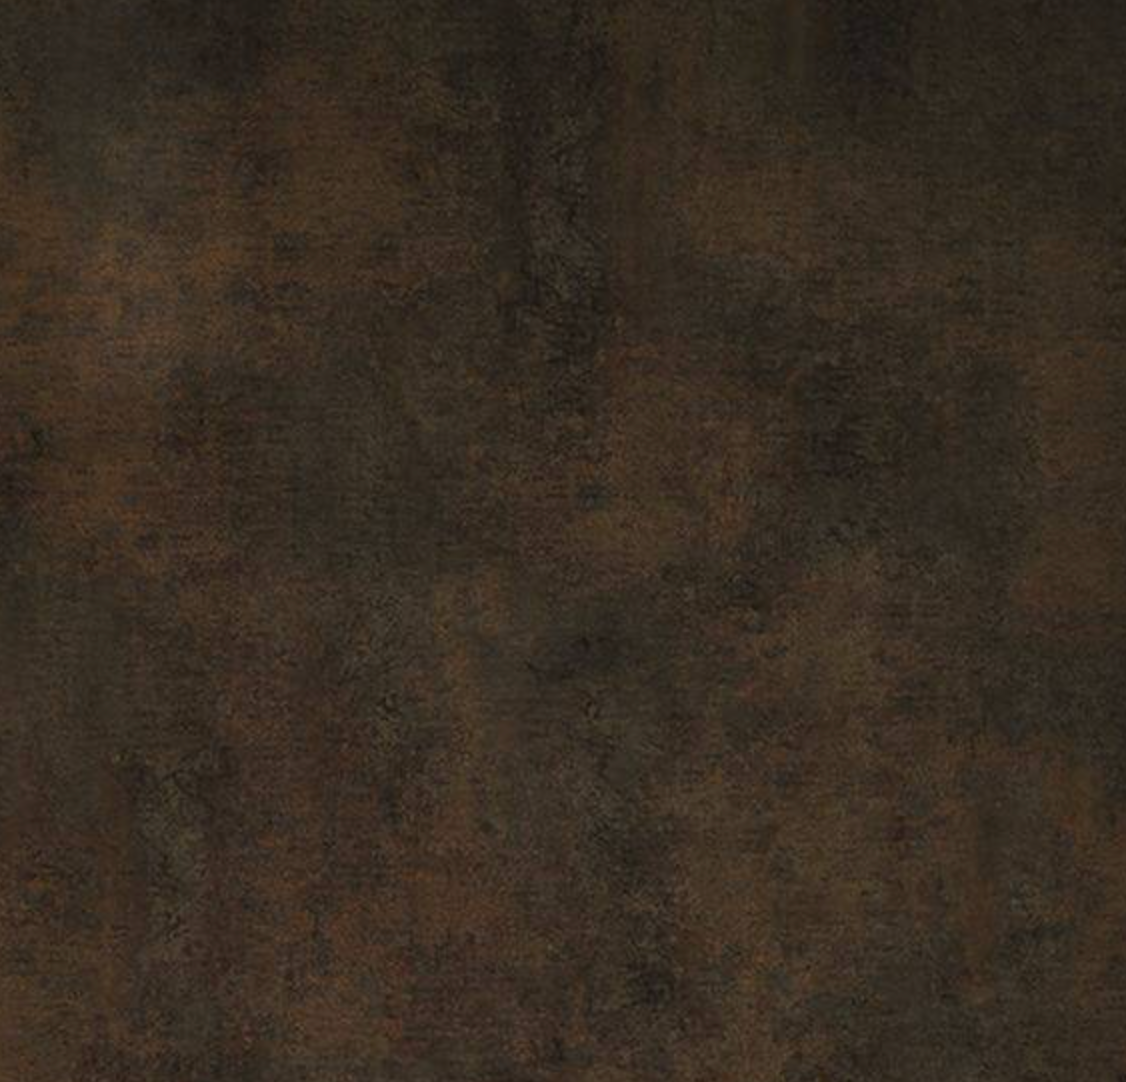 Showerwall Laminate Mineral Collection - Urban Gloss